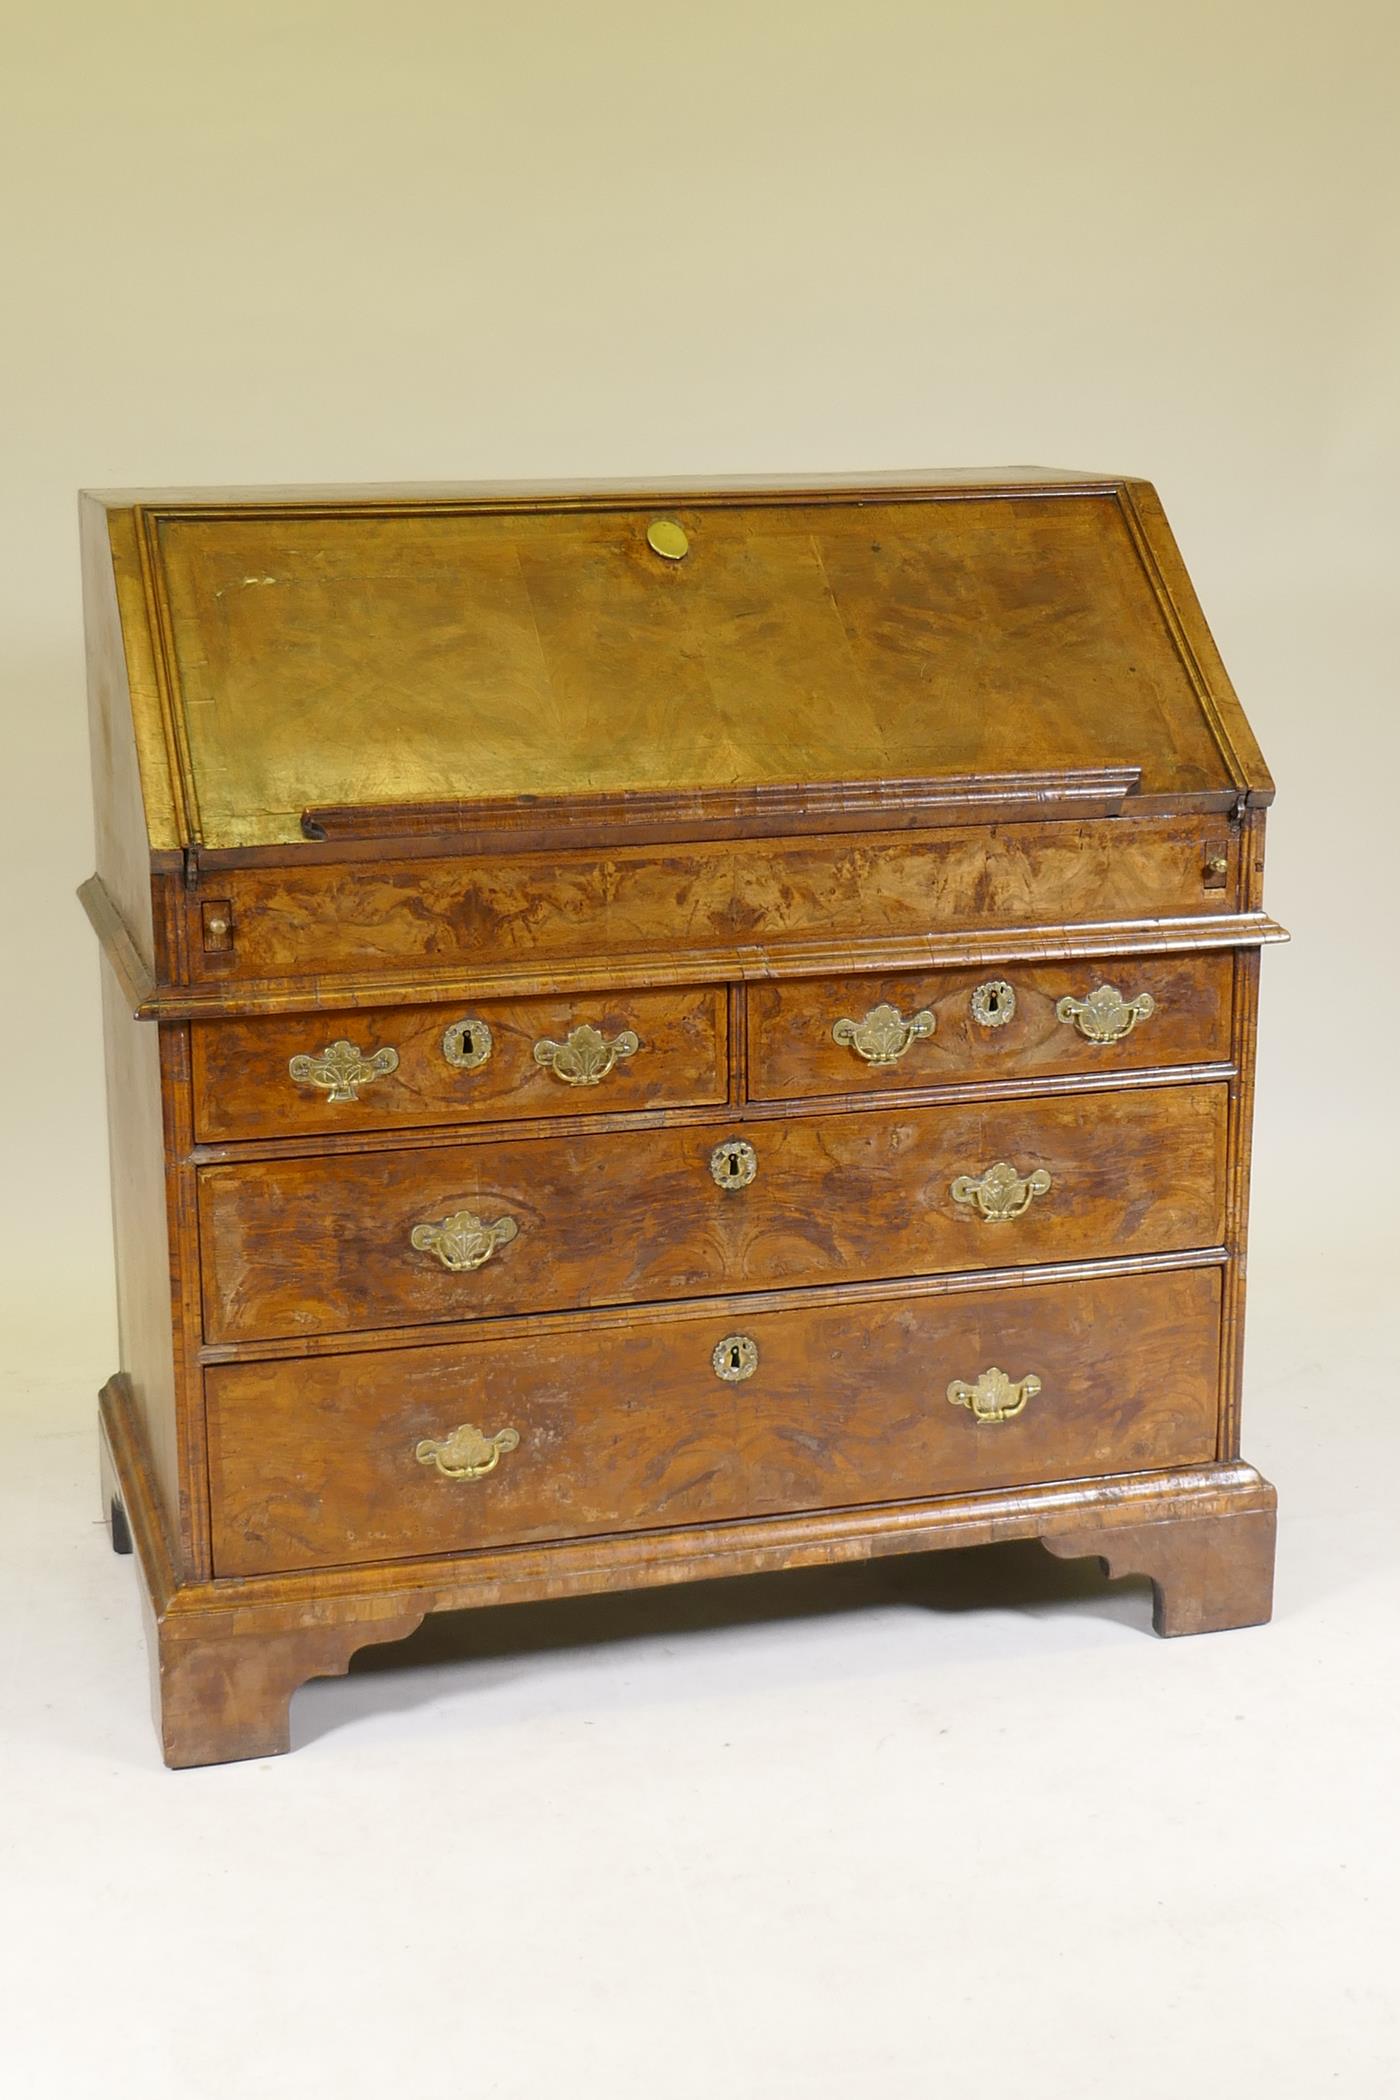 An C18th feather banded and figured walnut fall front bureau, the stepped interior with concave